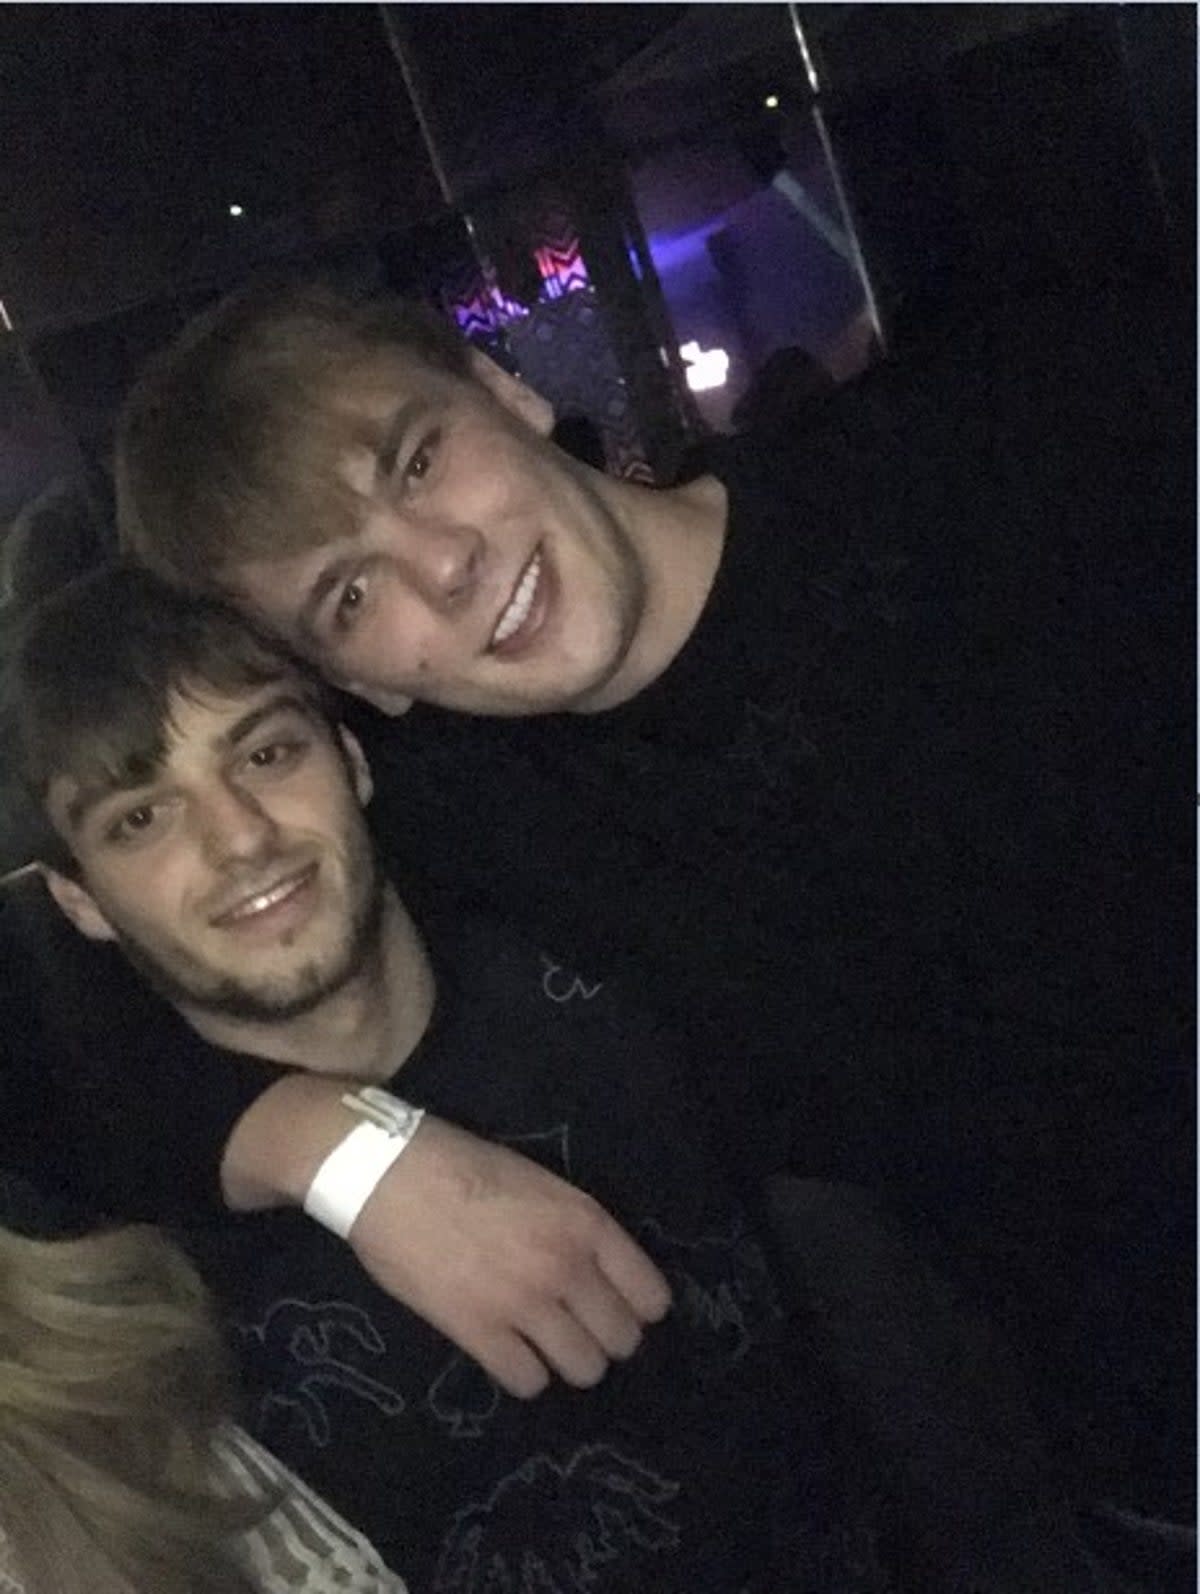 A feud between Dale’s boyfriend Lee Harrison (left) and Niall Barry (right) was allegedly re-ignited at Glastonbury festival last year (Merseyside Police)